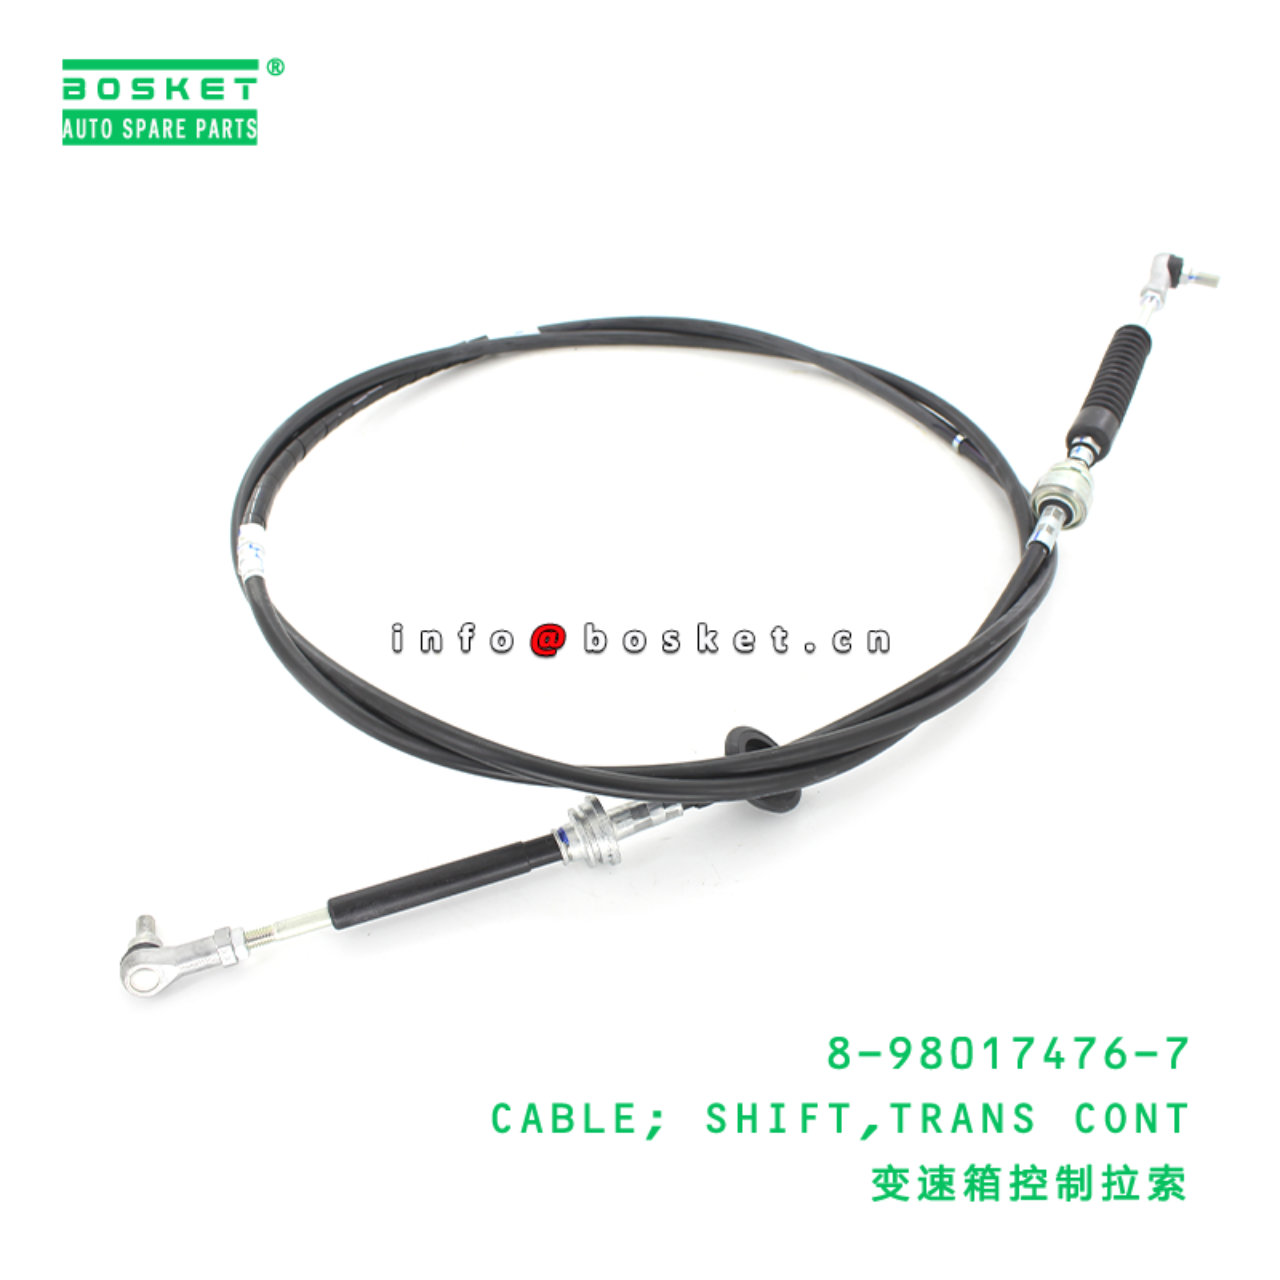 8-98017476-7 Transmission Control Shift Cable Suitable for ISUZU F Series Truck 8980174767